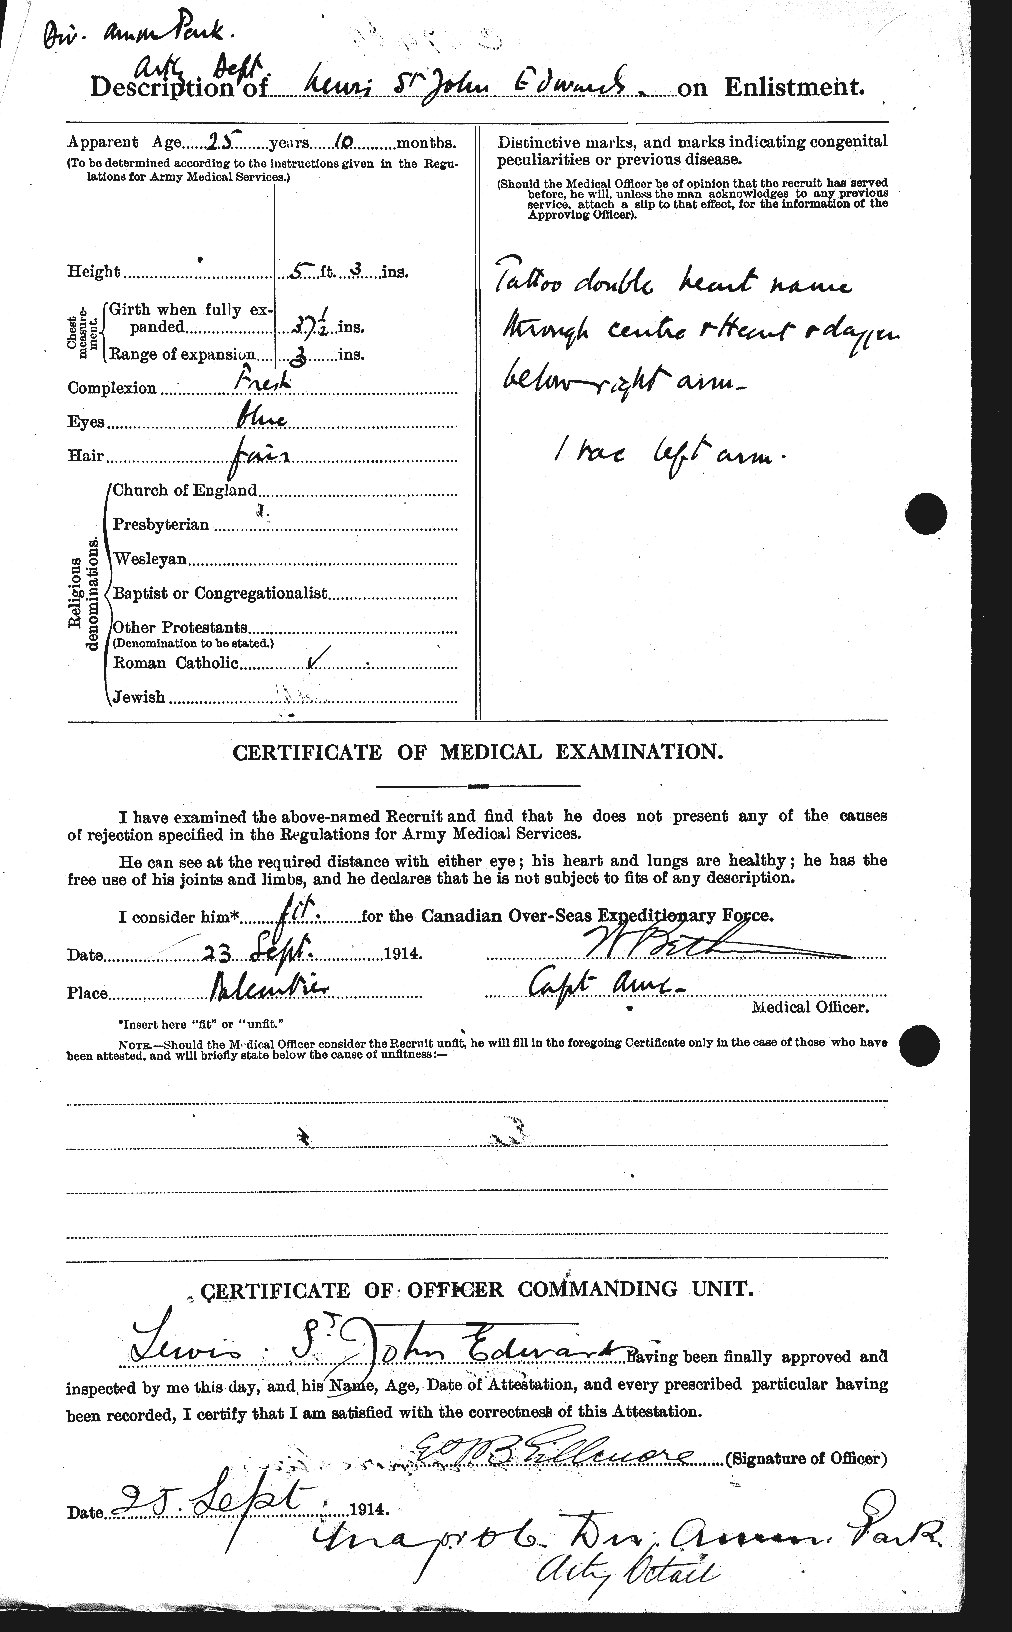 Personnel Records of the First World War - CEF 310203b